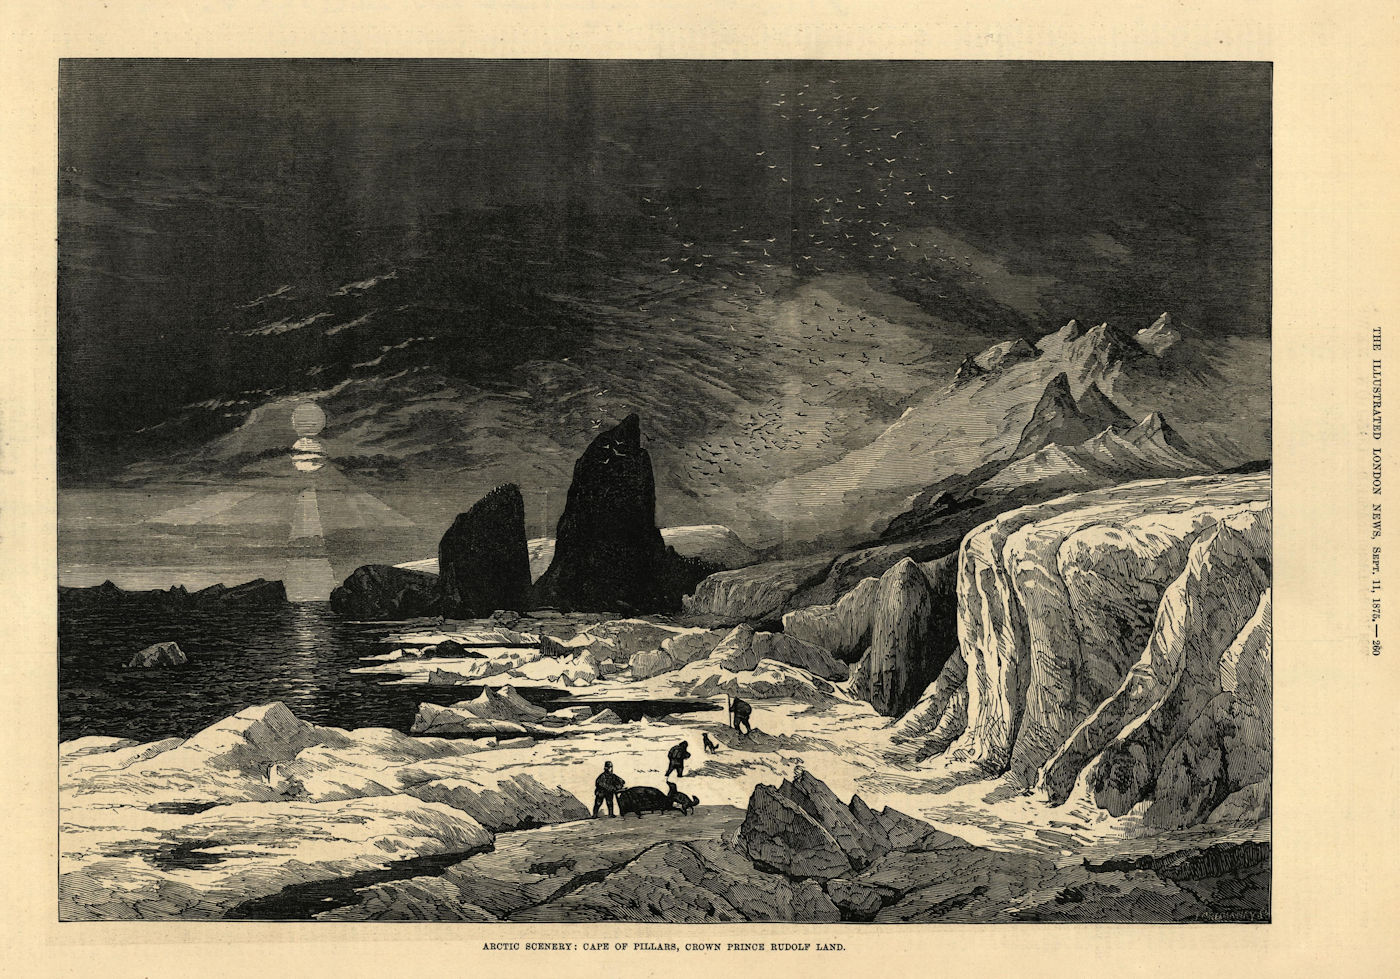 Associate Product Arctic scenery: Cape of Pillars, Crown Prince Rudolf Land 1875 ILN full page